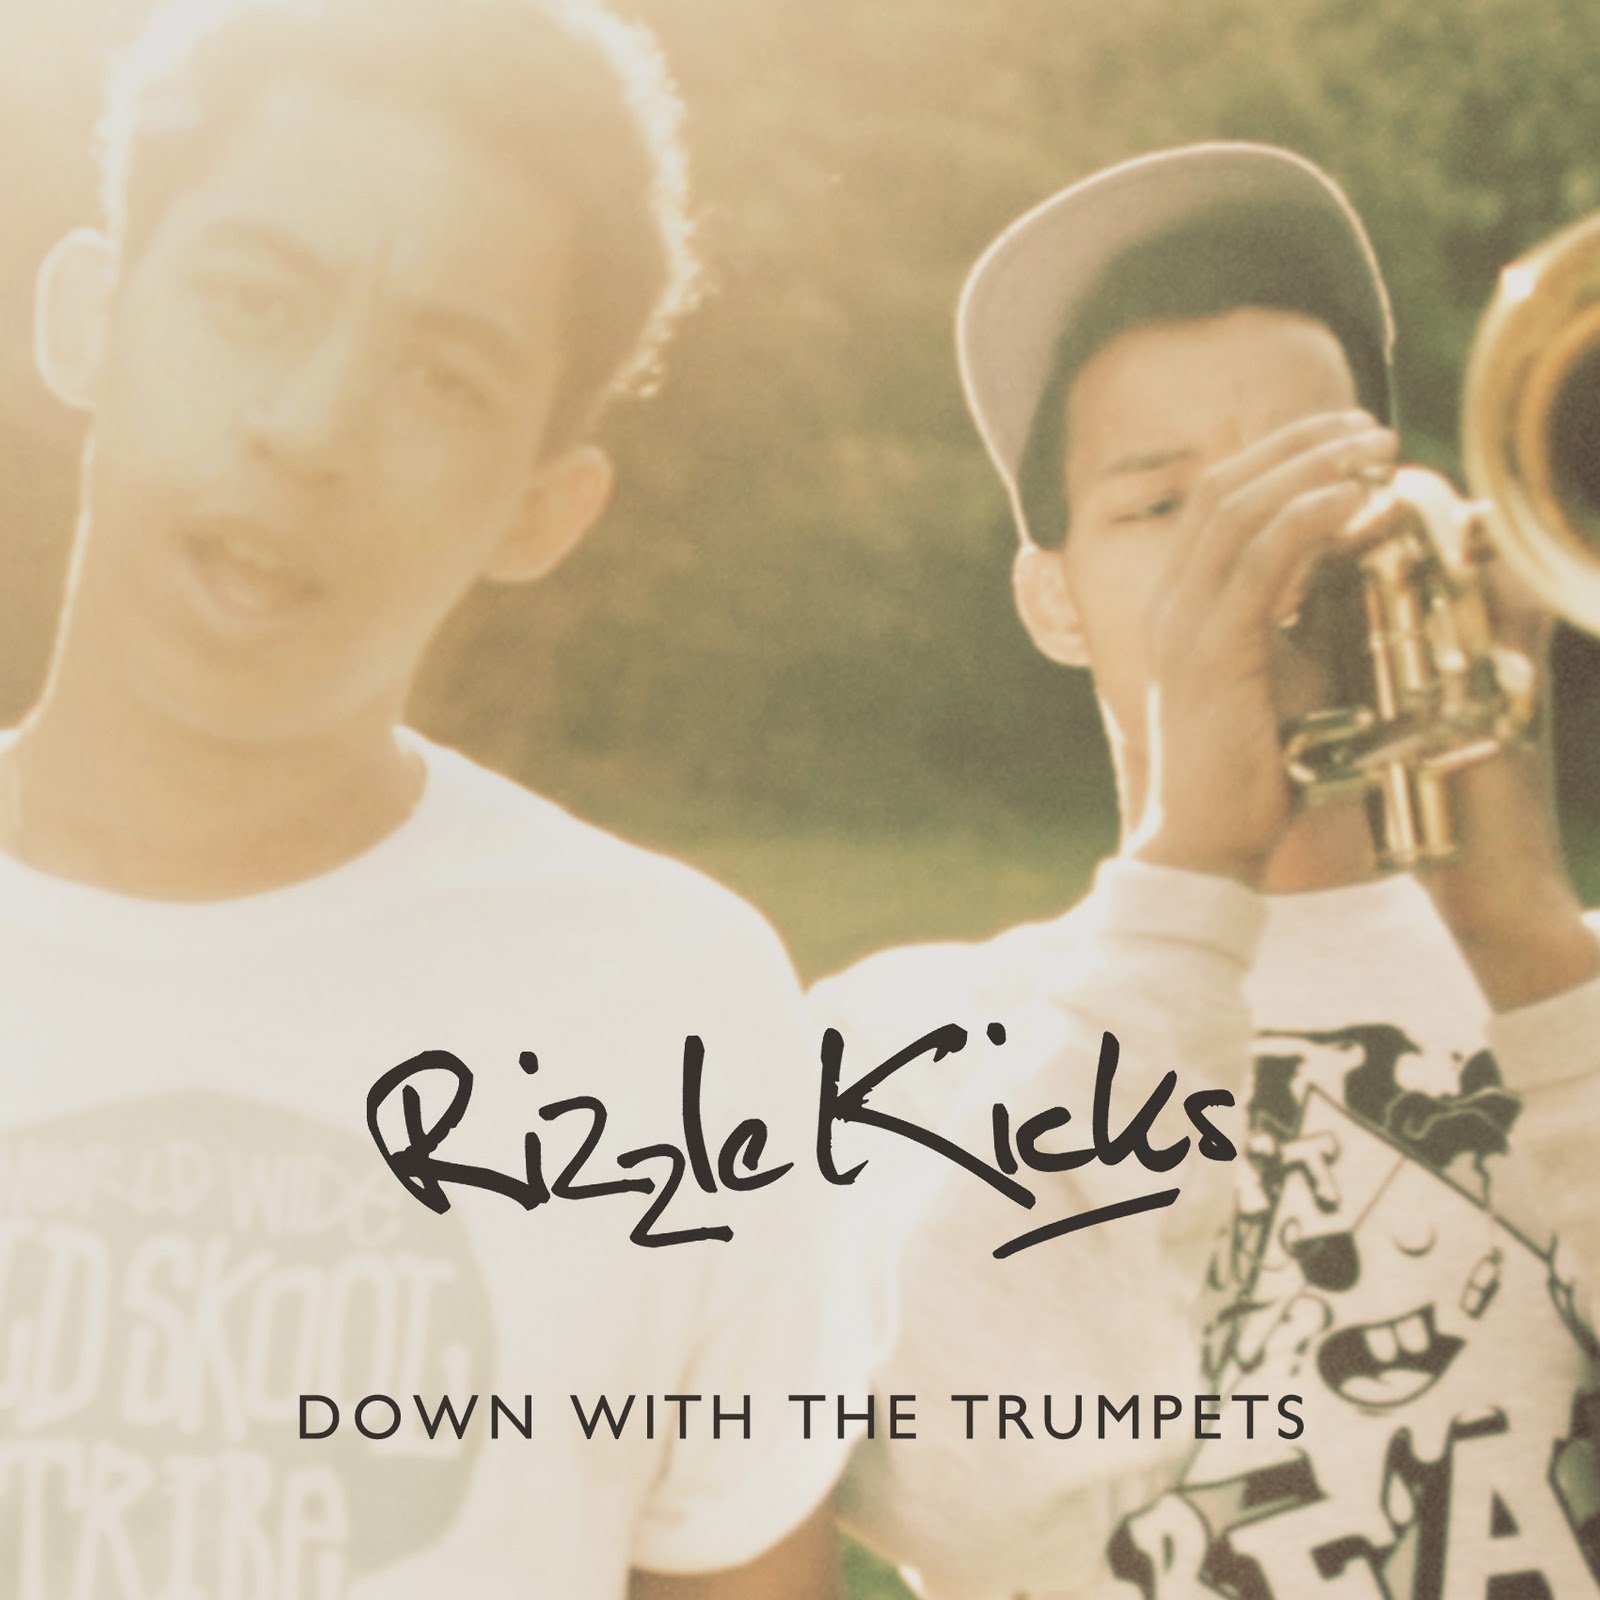 24. Rizzle Kicks - Down With The Trumpets